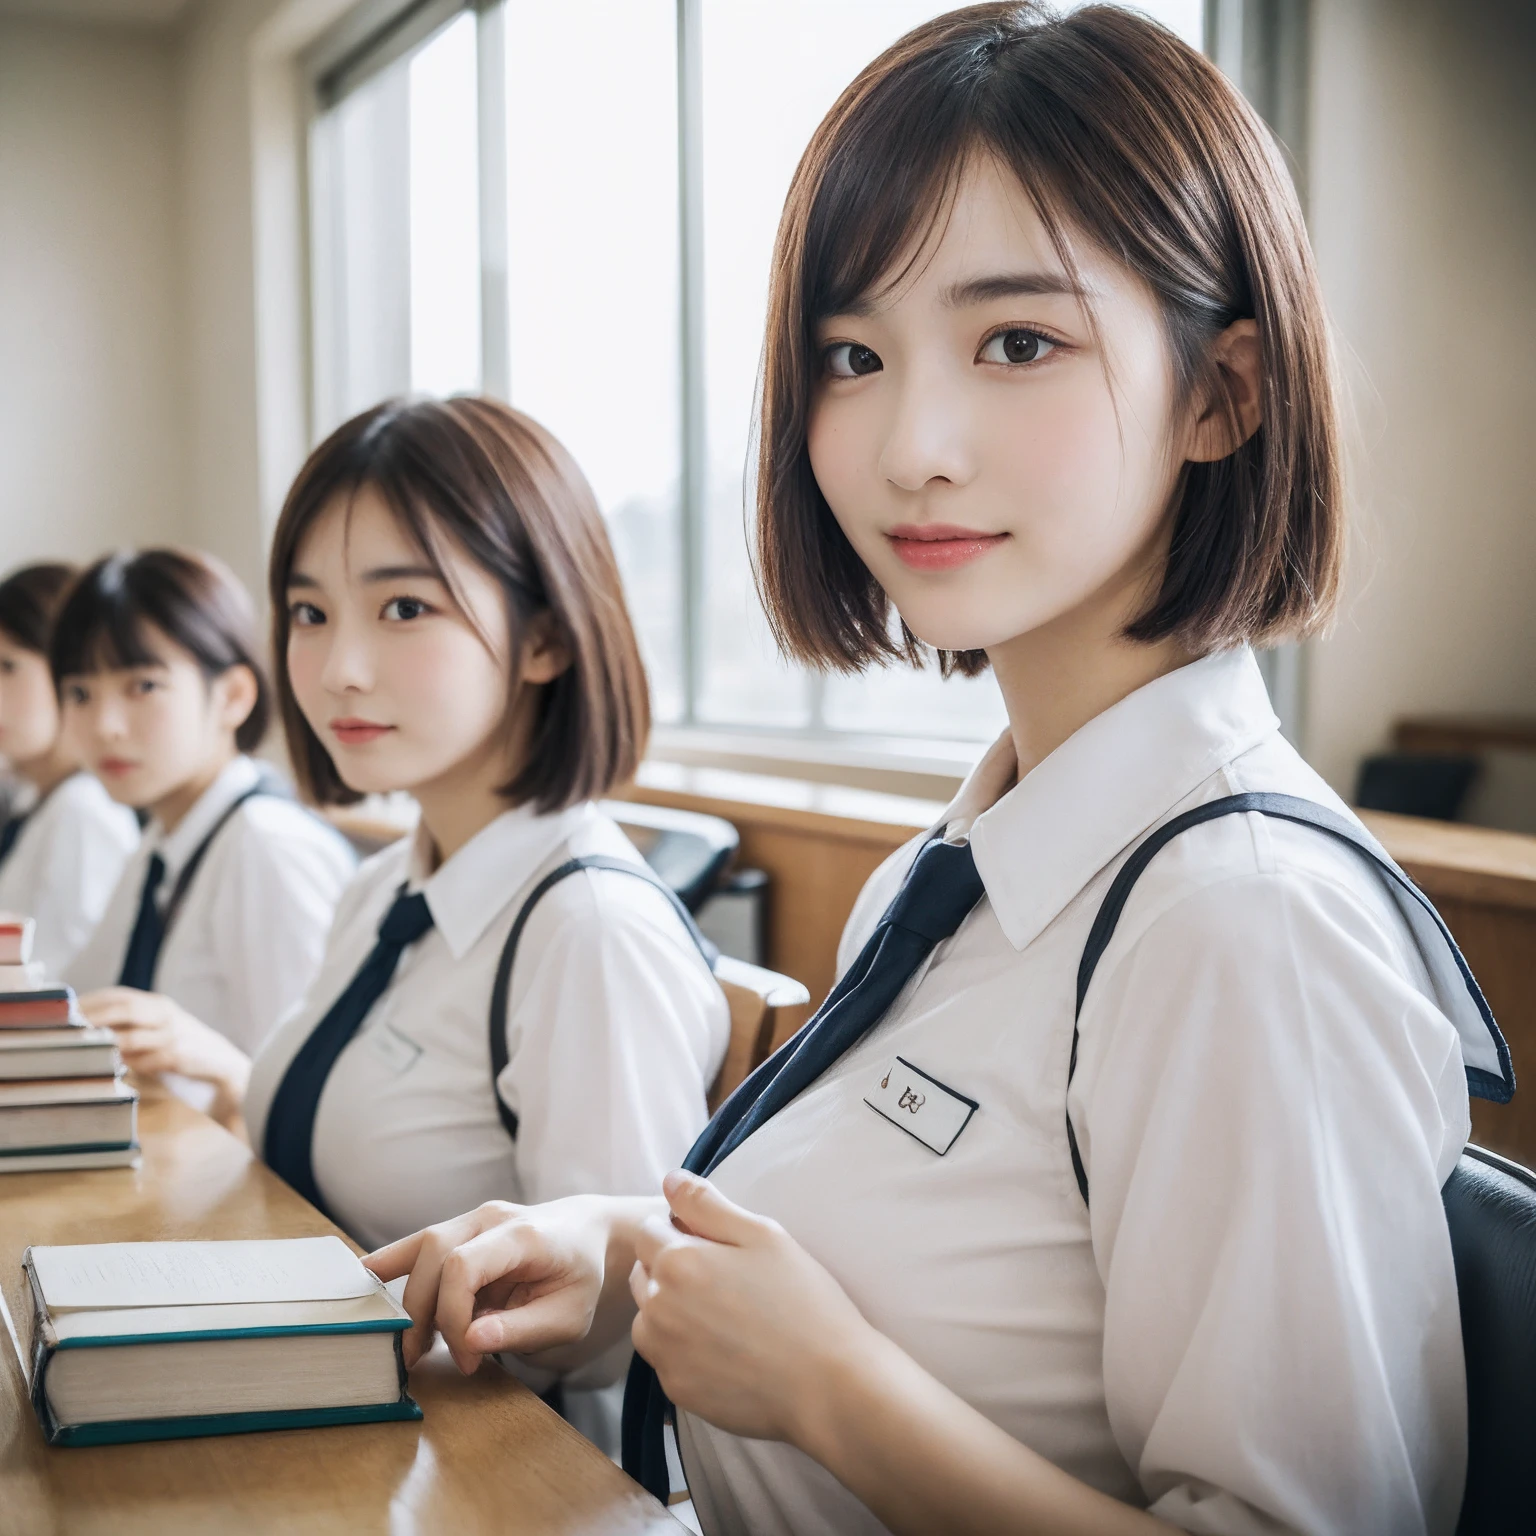 ((layered haircuts、Colossal tits:1.2)),（8K，highest  quality），full body shot shot，Watching from a distance，Distant shots，School Classroom，looking at book，In class，Uniforms，pupils，High school student uniform，Full body photography:1.9，android， adolable， ssmile， Thin face， short detailed hair， 32k, tmasterpiece， Best picture quality，超A high resolution，Perfect hands，Looking_at_peeping at the viewer，